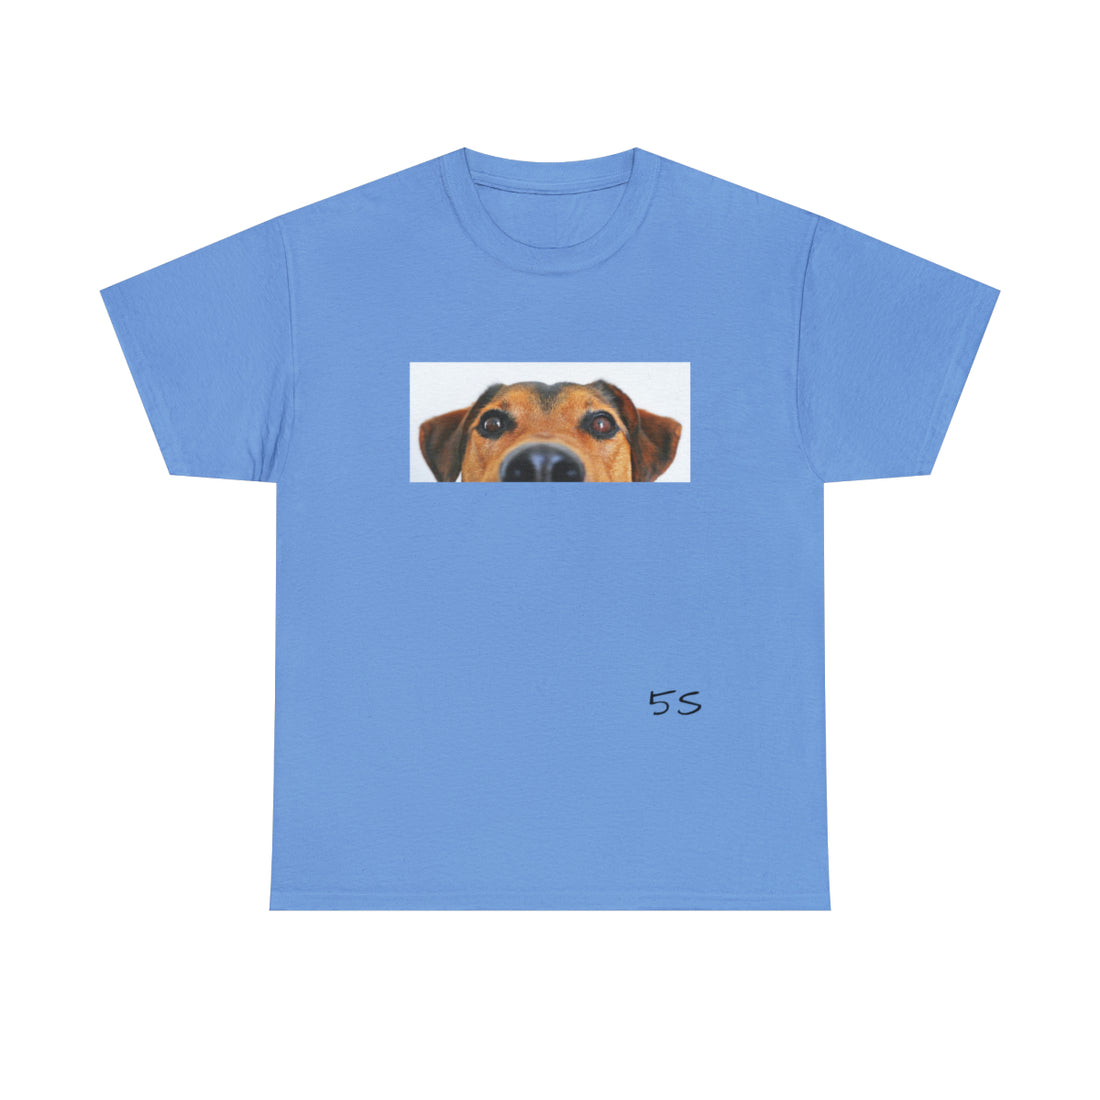 "Unleash Your Style: Discover Our Fresh New Re-designed Dog Lovers T-Shirts!" #Tshirts #doglovers  #dogshirts  #tshirts  #customtshirts  #dogfashion  #dogapparel  #doglovergifts  #dogmom  #dogdad #doglife